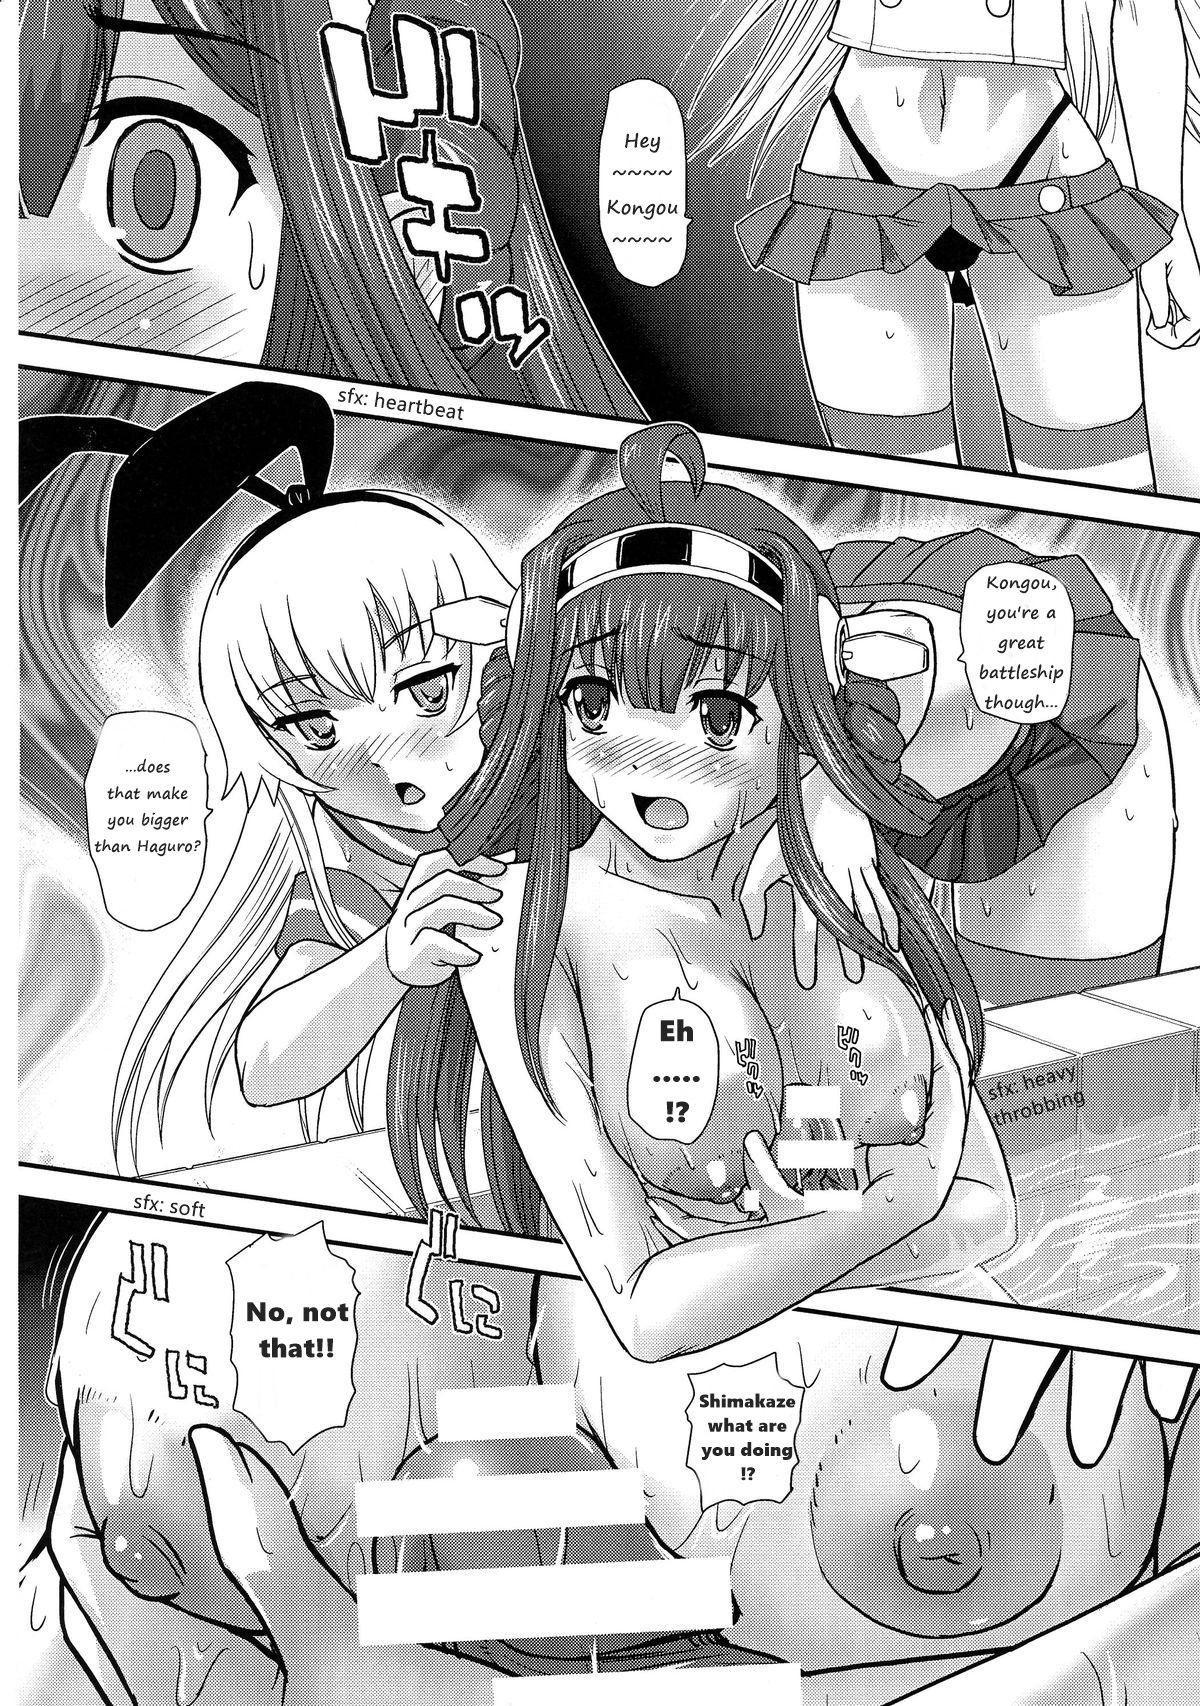 Gapes Gaping Asshole Chinshufu!! - Kantai collection Arpeggio of blue steel Classroom - Page 10